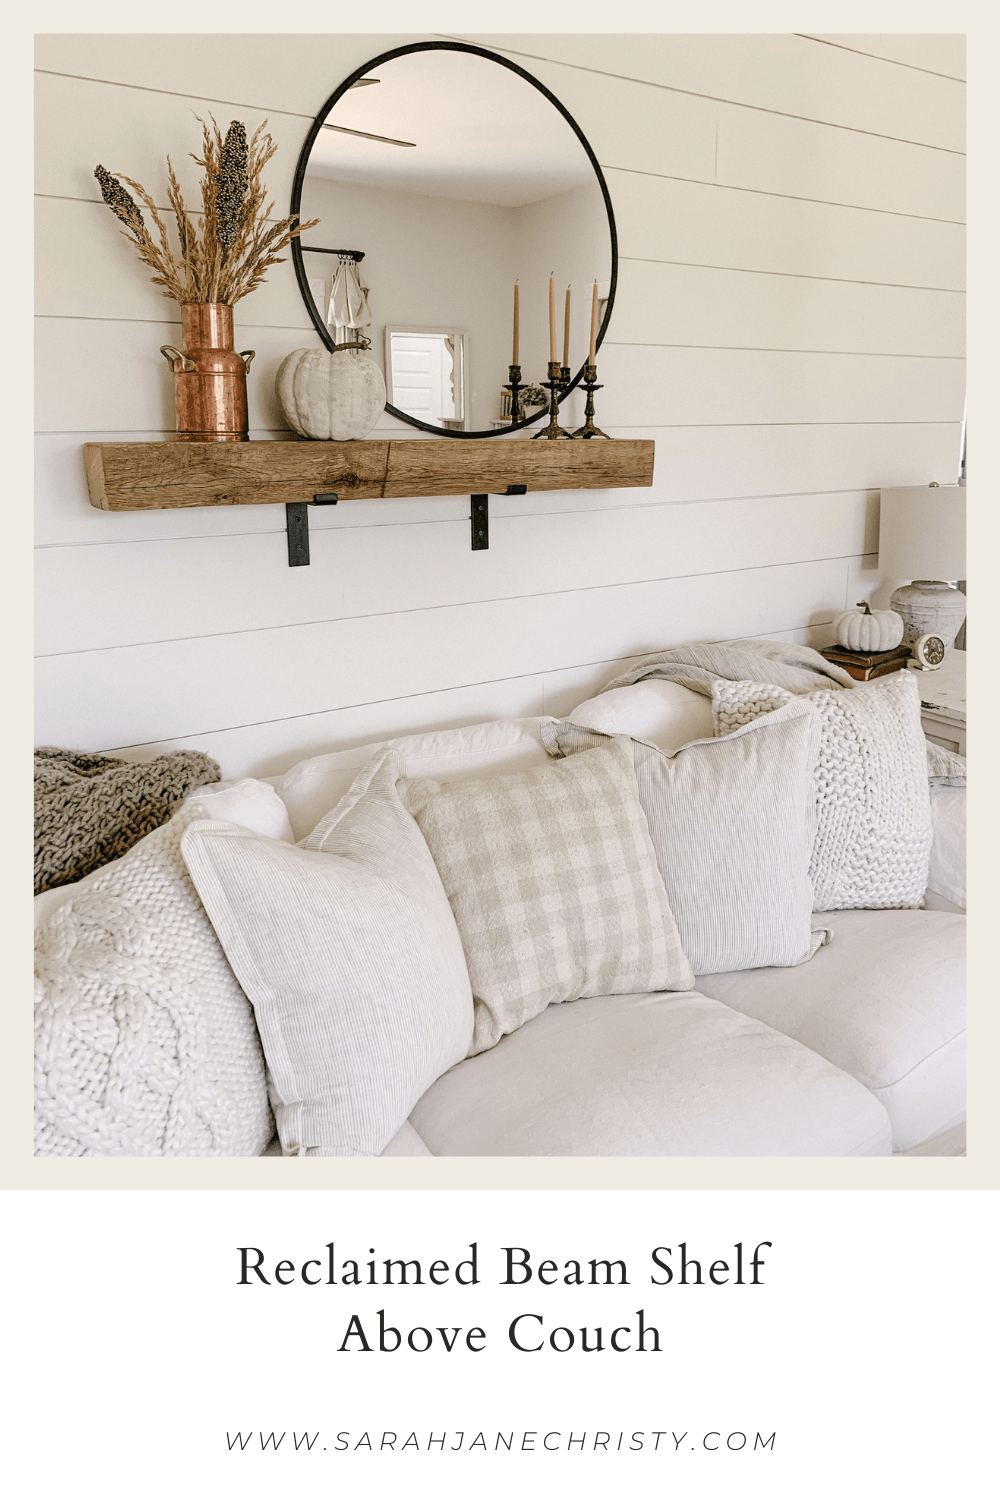 Reclaimed Beam Shelf Above Couch - Sarah Jane Christy